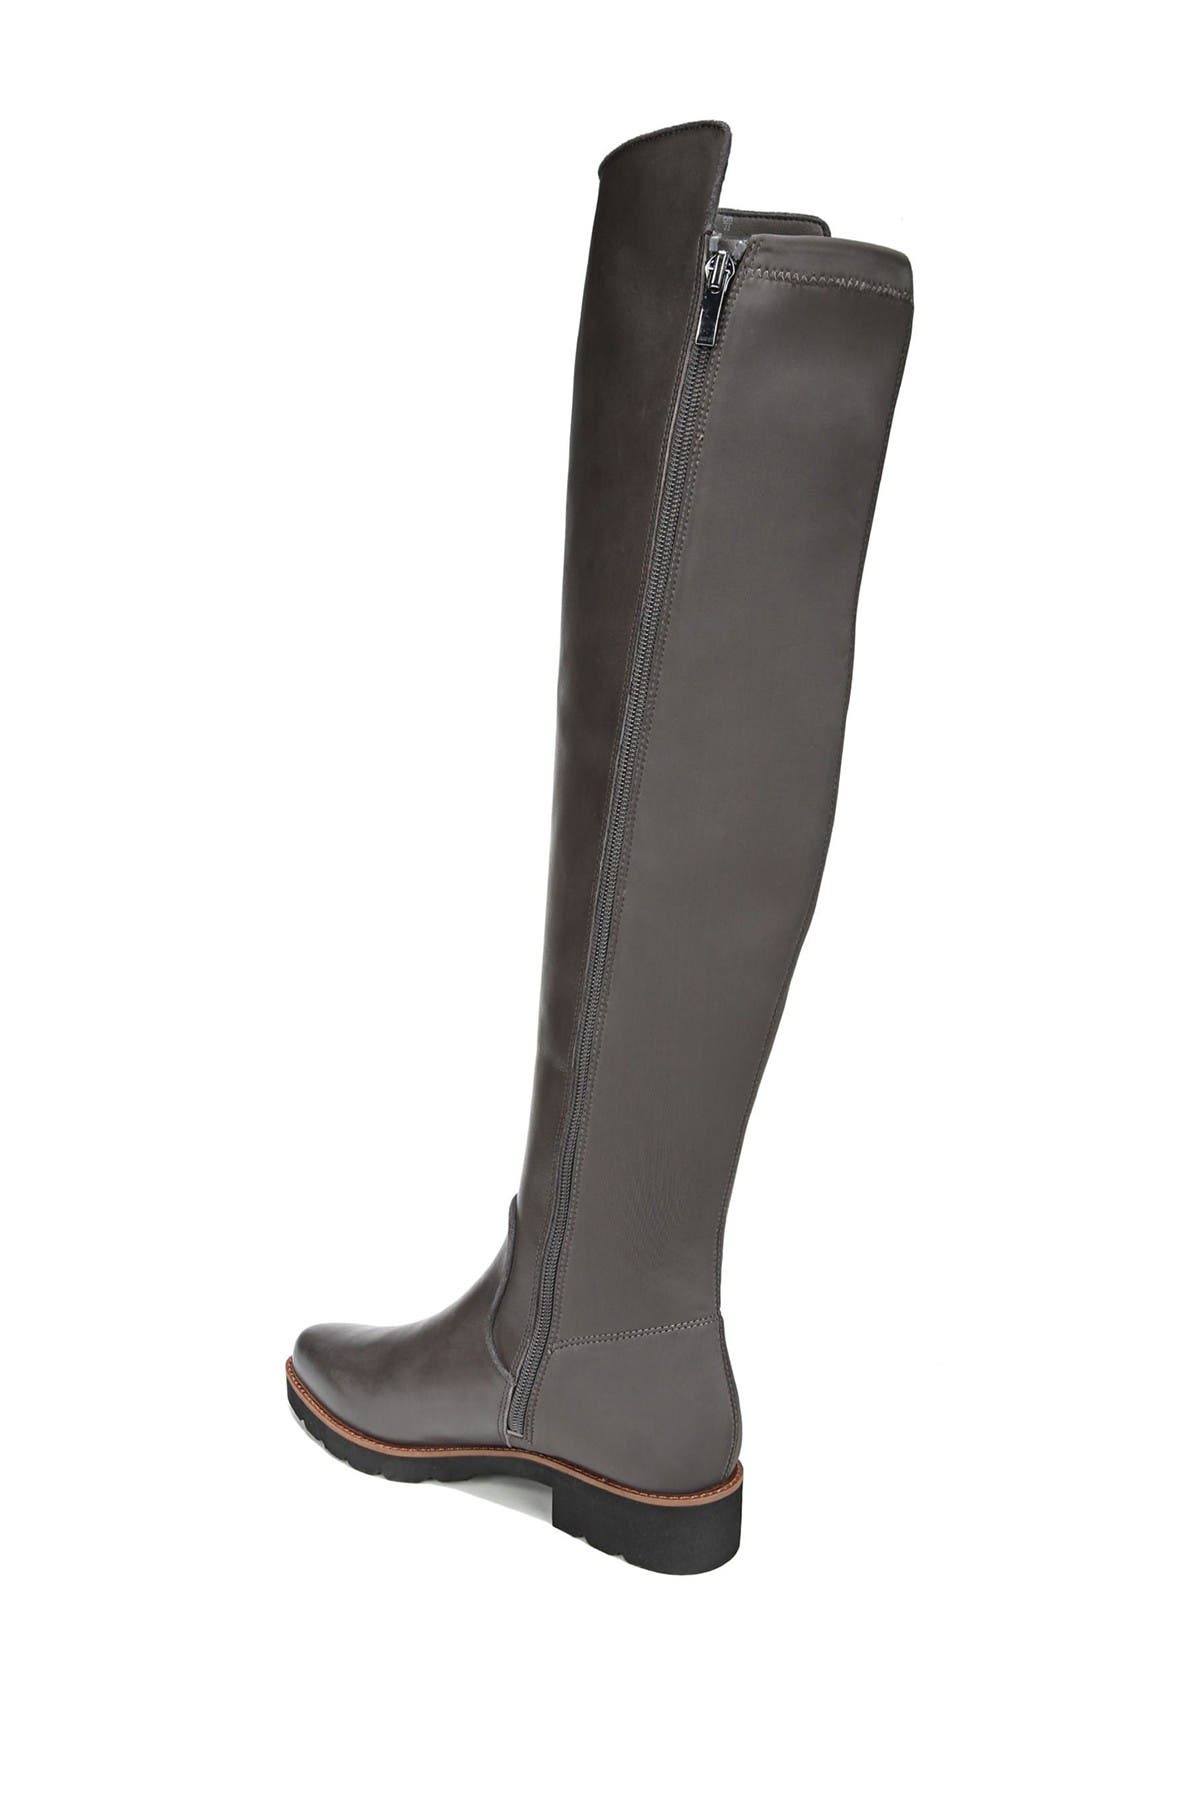 franco sarto benner leather over the knee boot